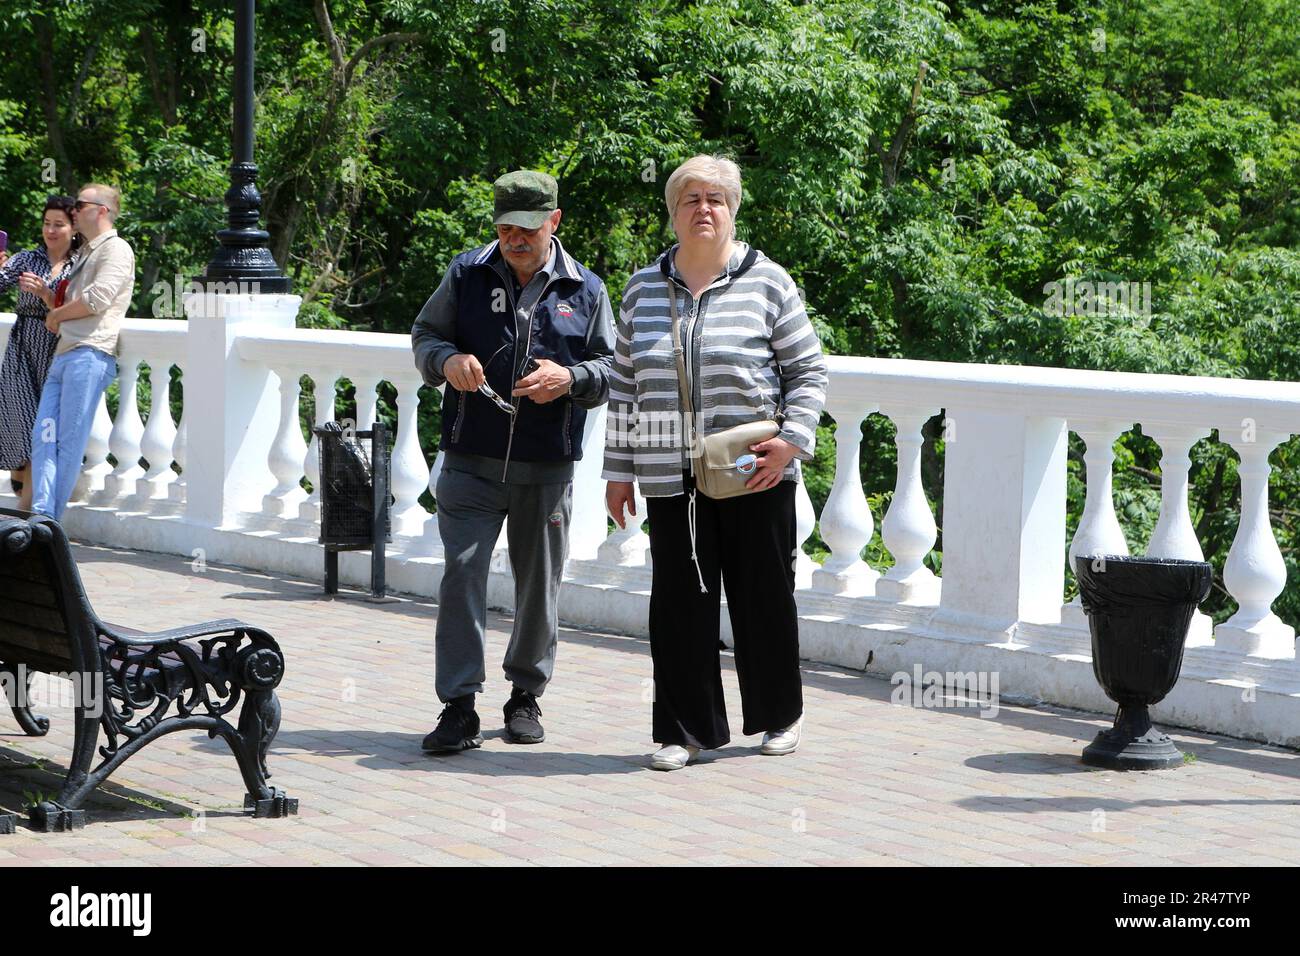 Russian pensioners (a man and a woman) walk along the Flower Garden Park at the Mineralnye Vody resort in the Russian Federation. Stock Photo